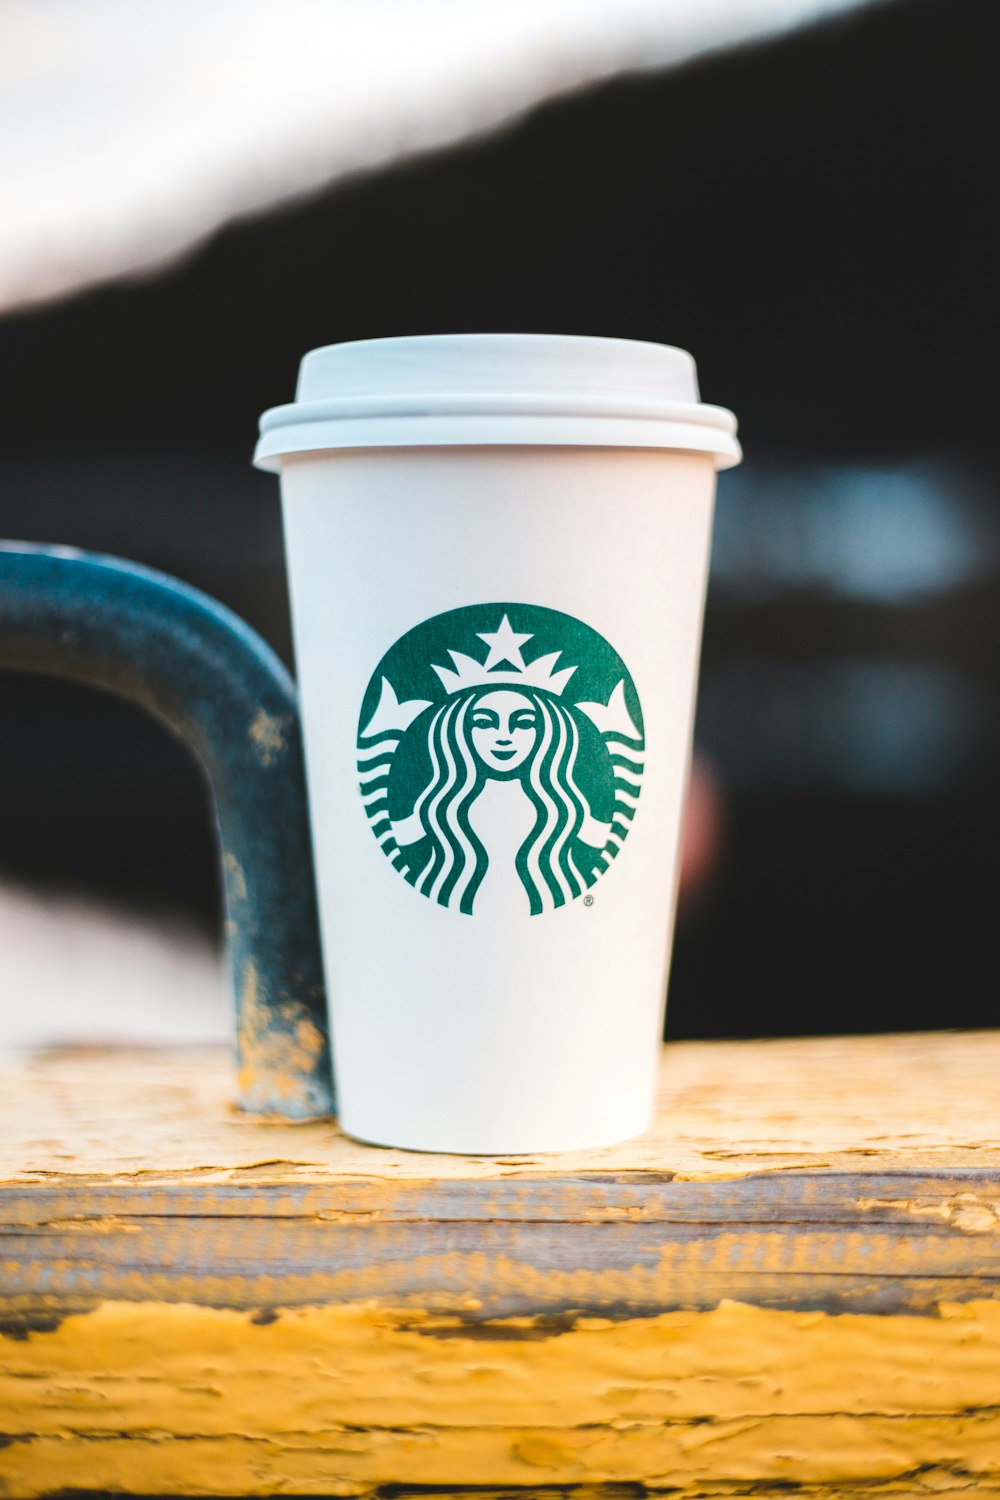 Starbucks Cup Pictures | Download Free Images on Unsplash